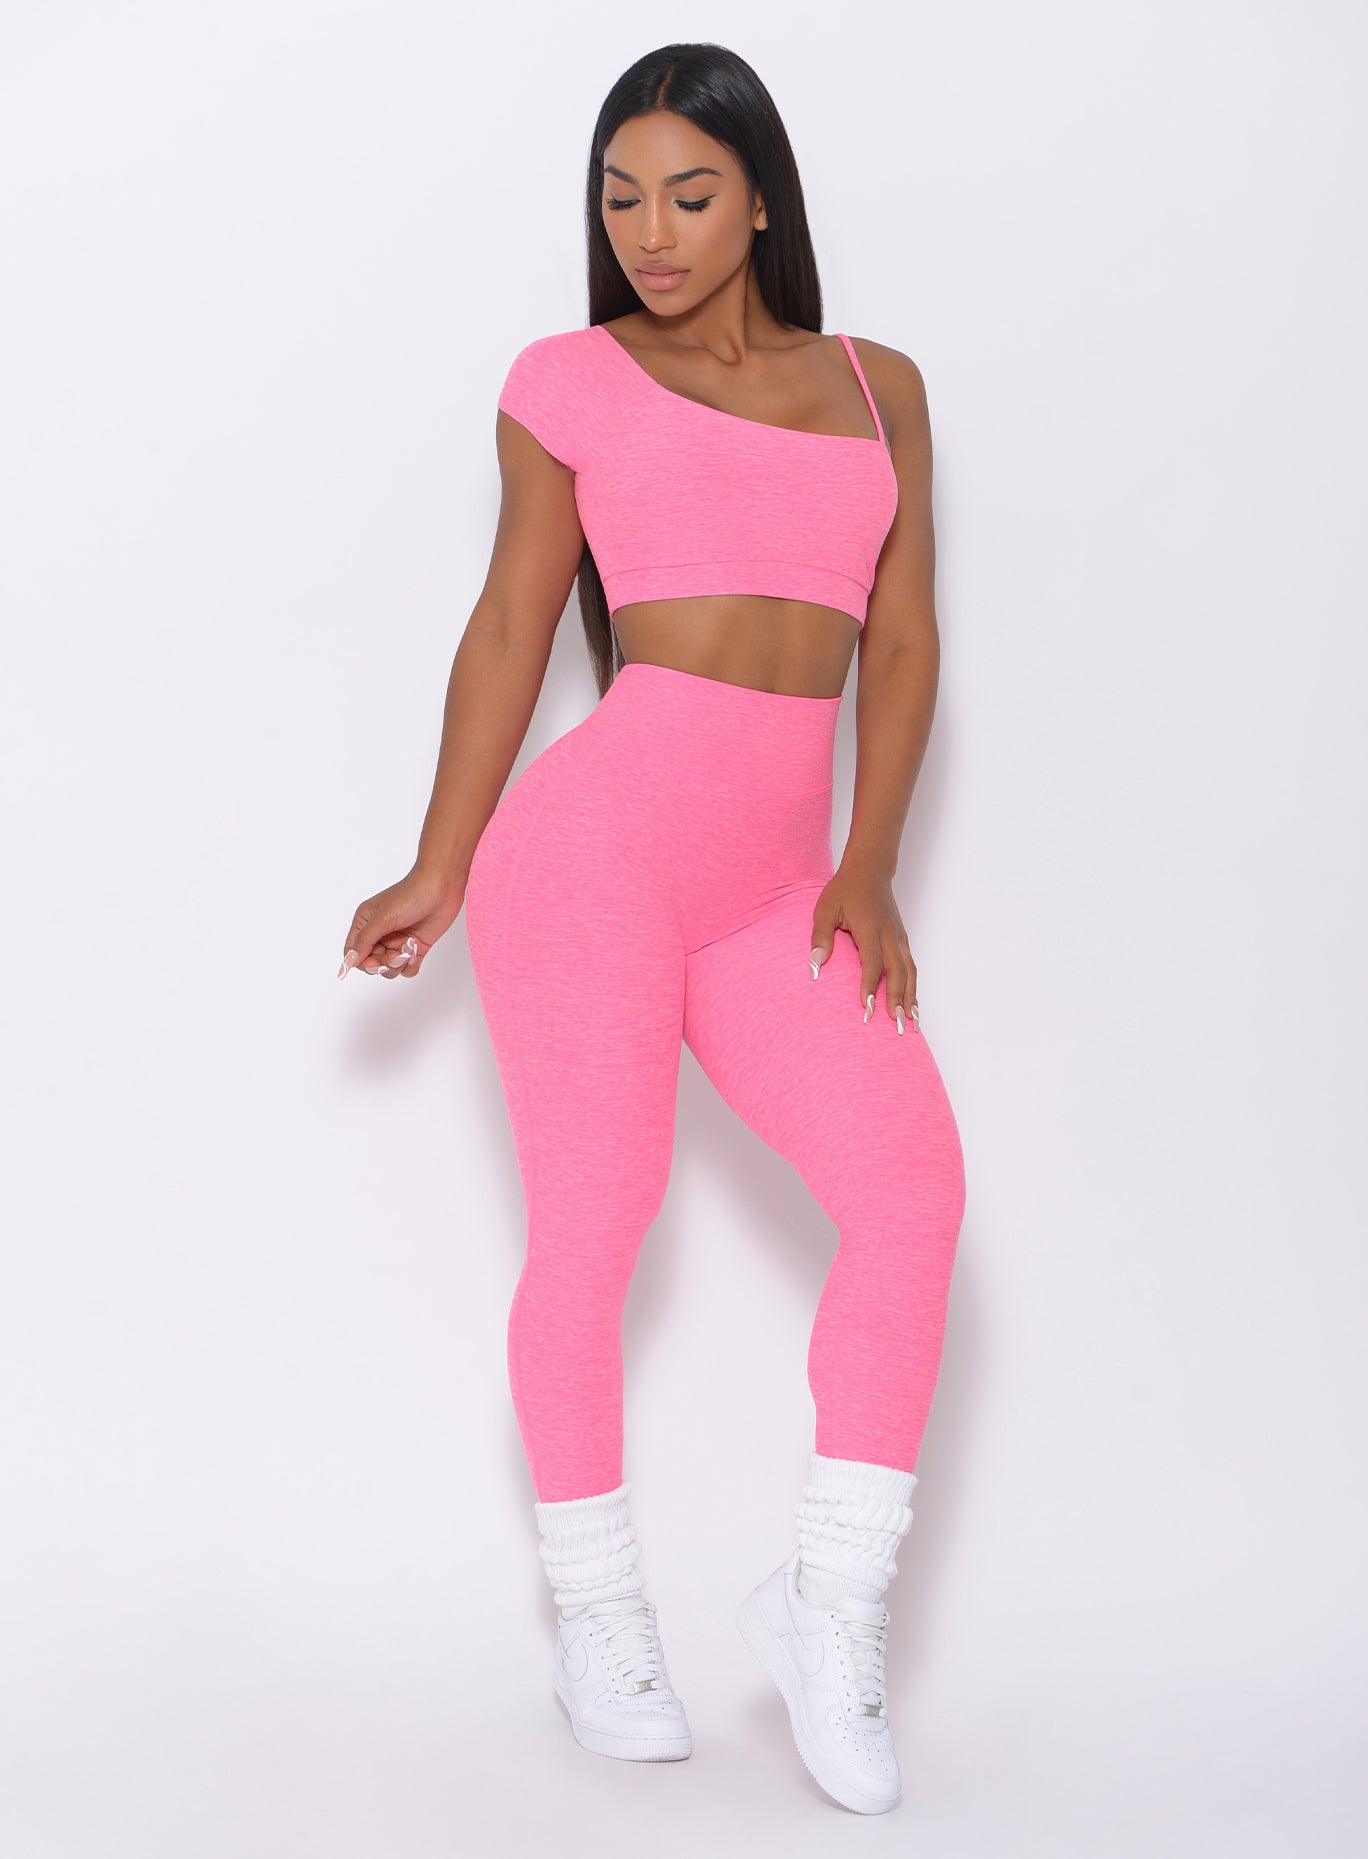 Front profile view of the model in our pink fit leggings and a matching top